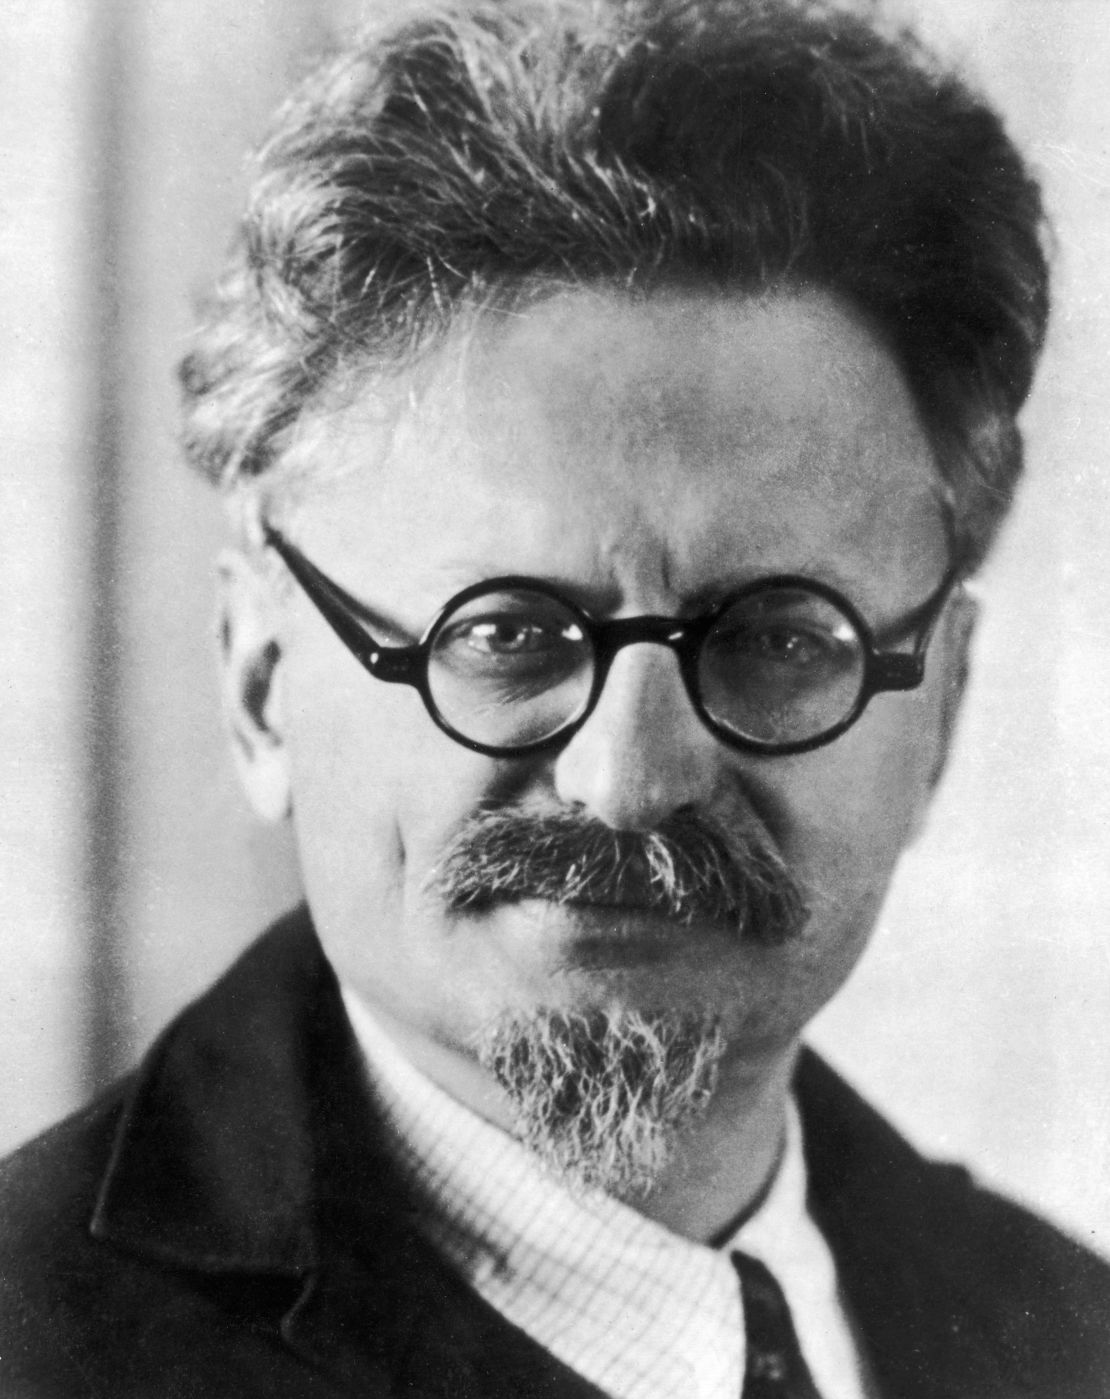 Leon Trotsky, during his exile in the 1930s 